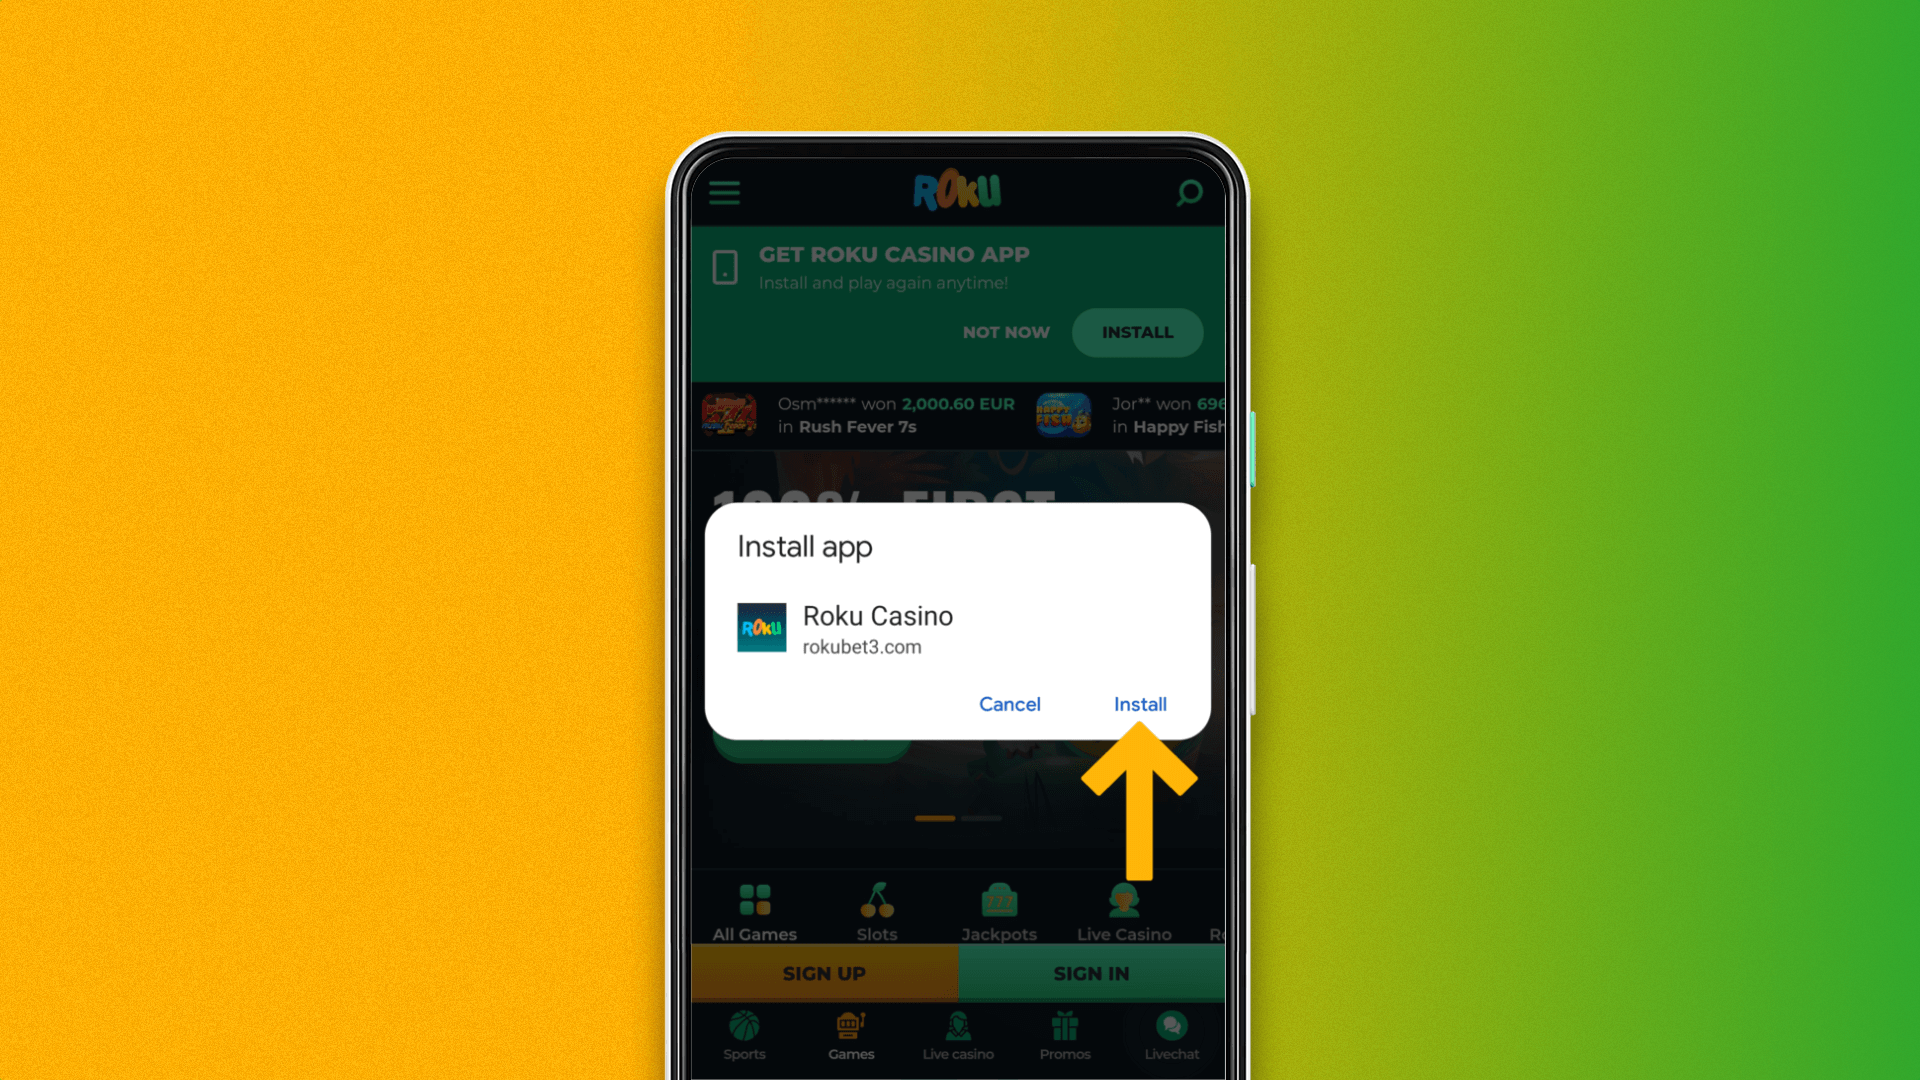 Confirming the installation of the Rokubet app on your smartphone